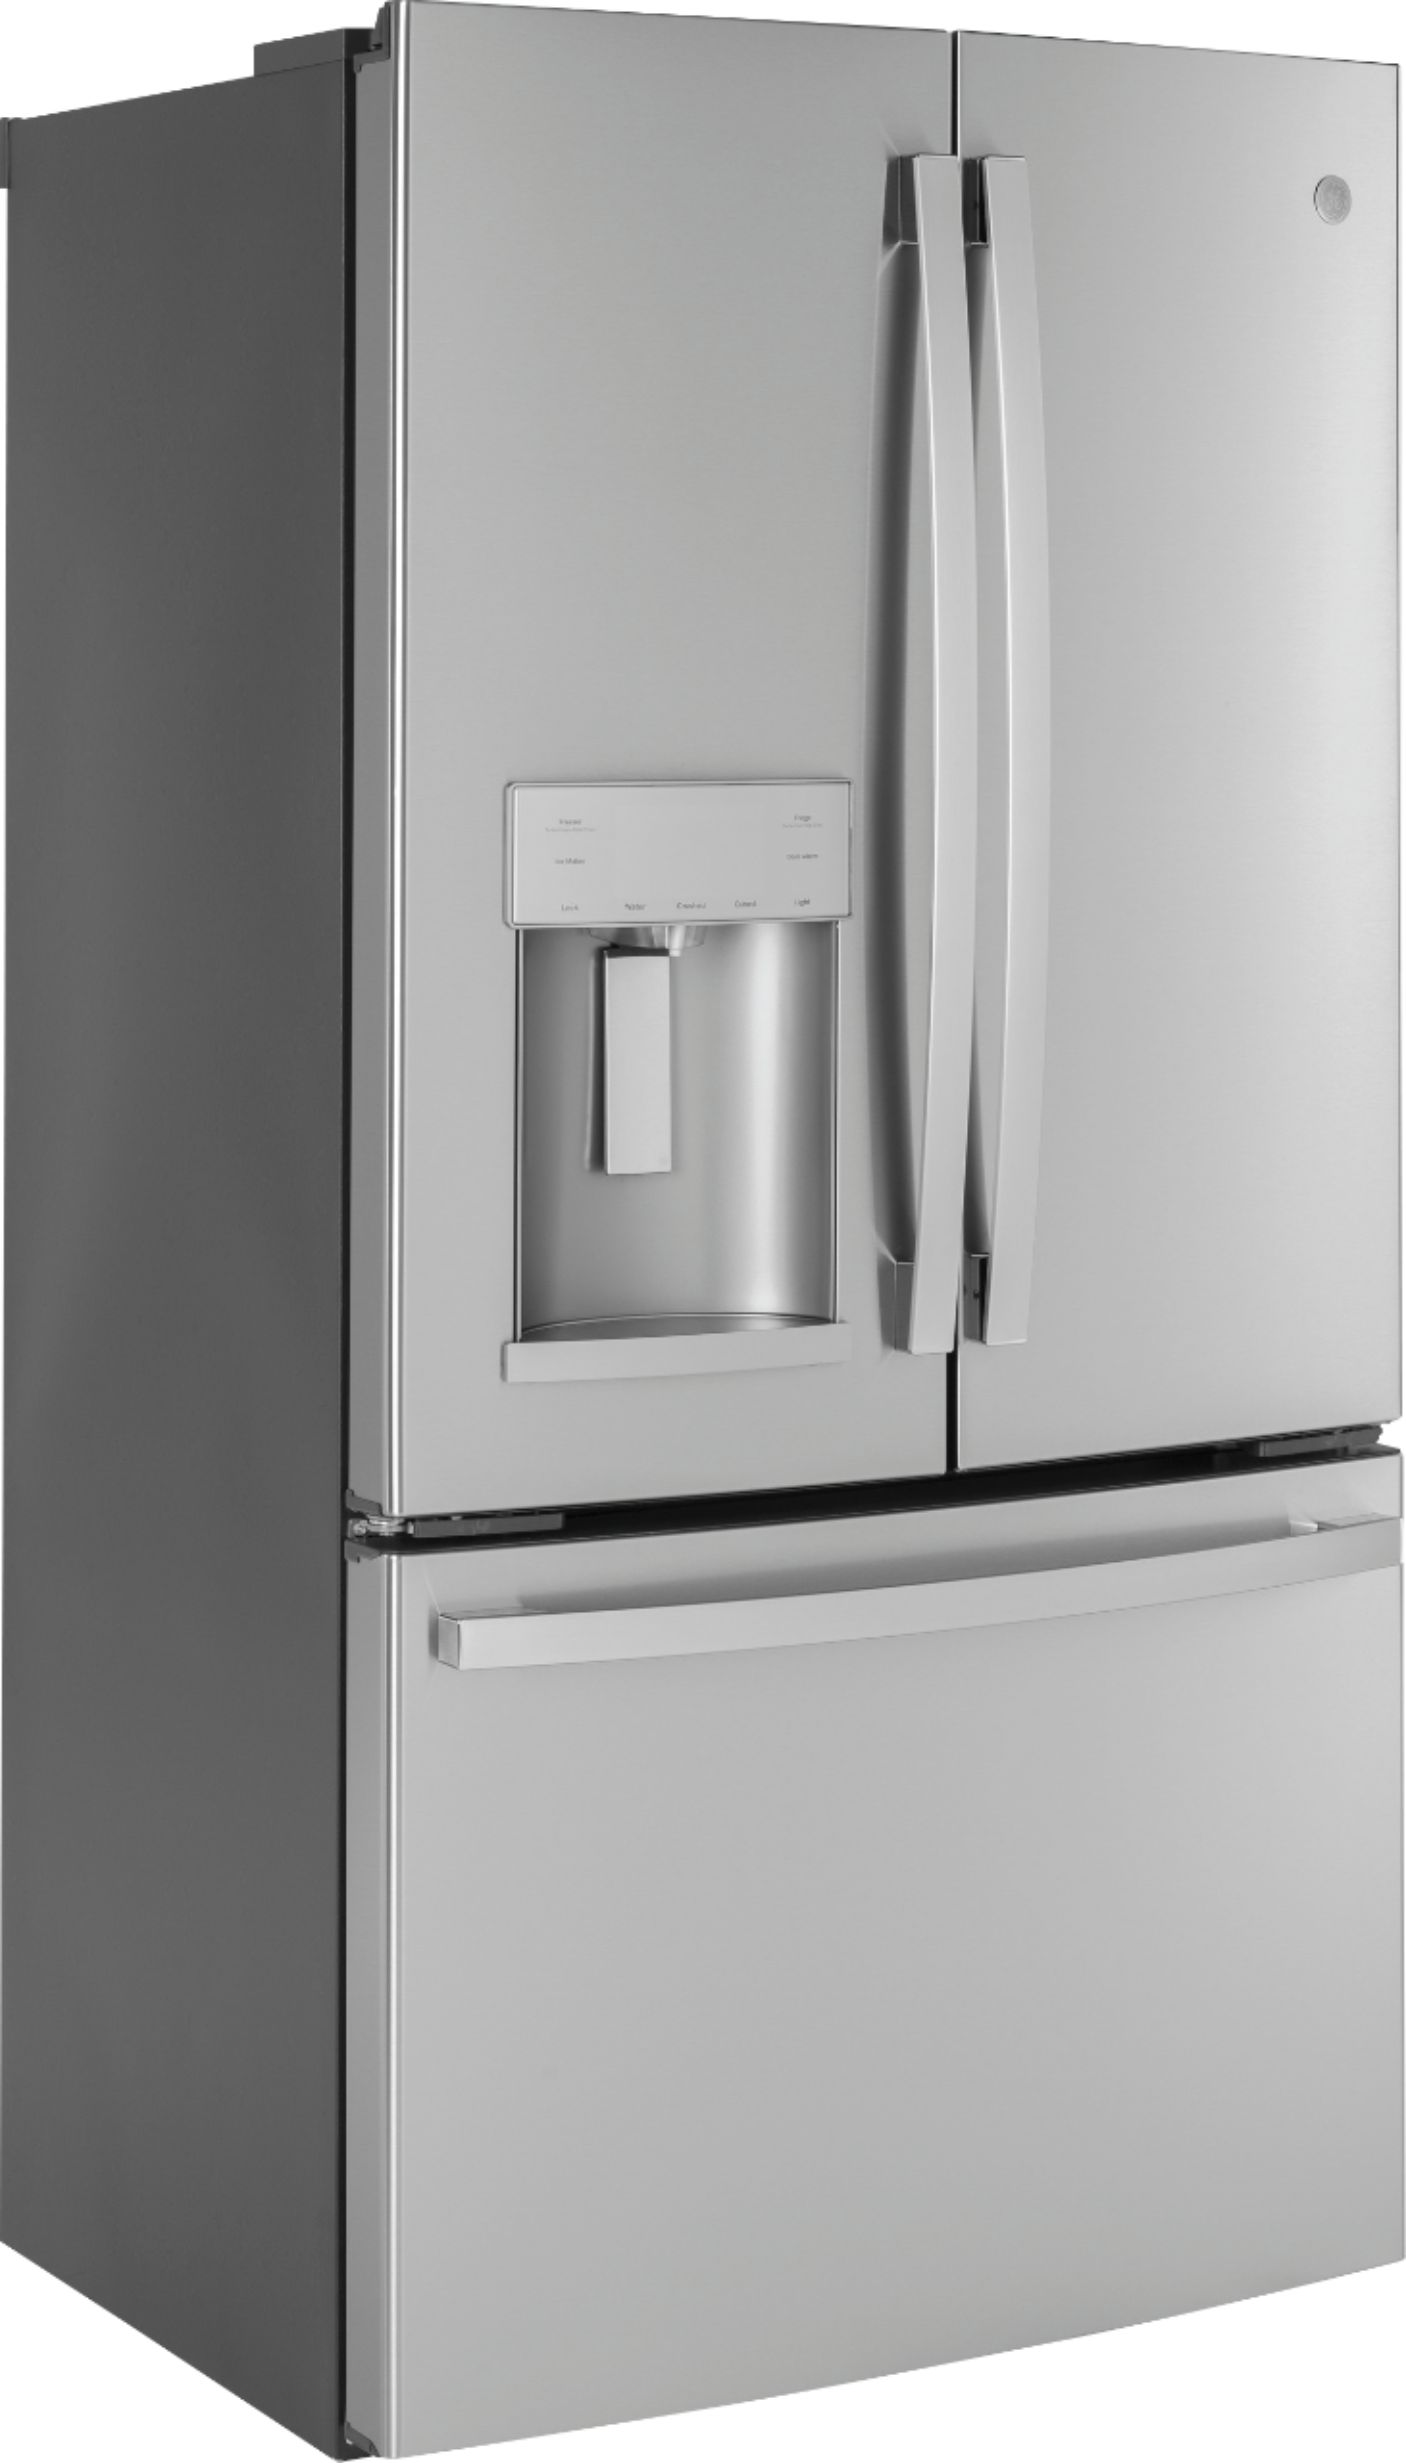 Angle View: GE - 22.1 Cu. Ft. French Door Counter-Depth Refrigerator - Stainless steel